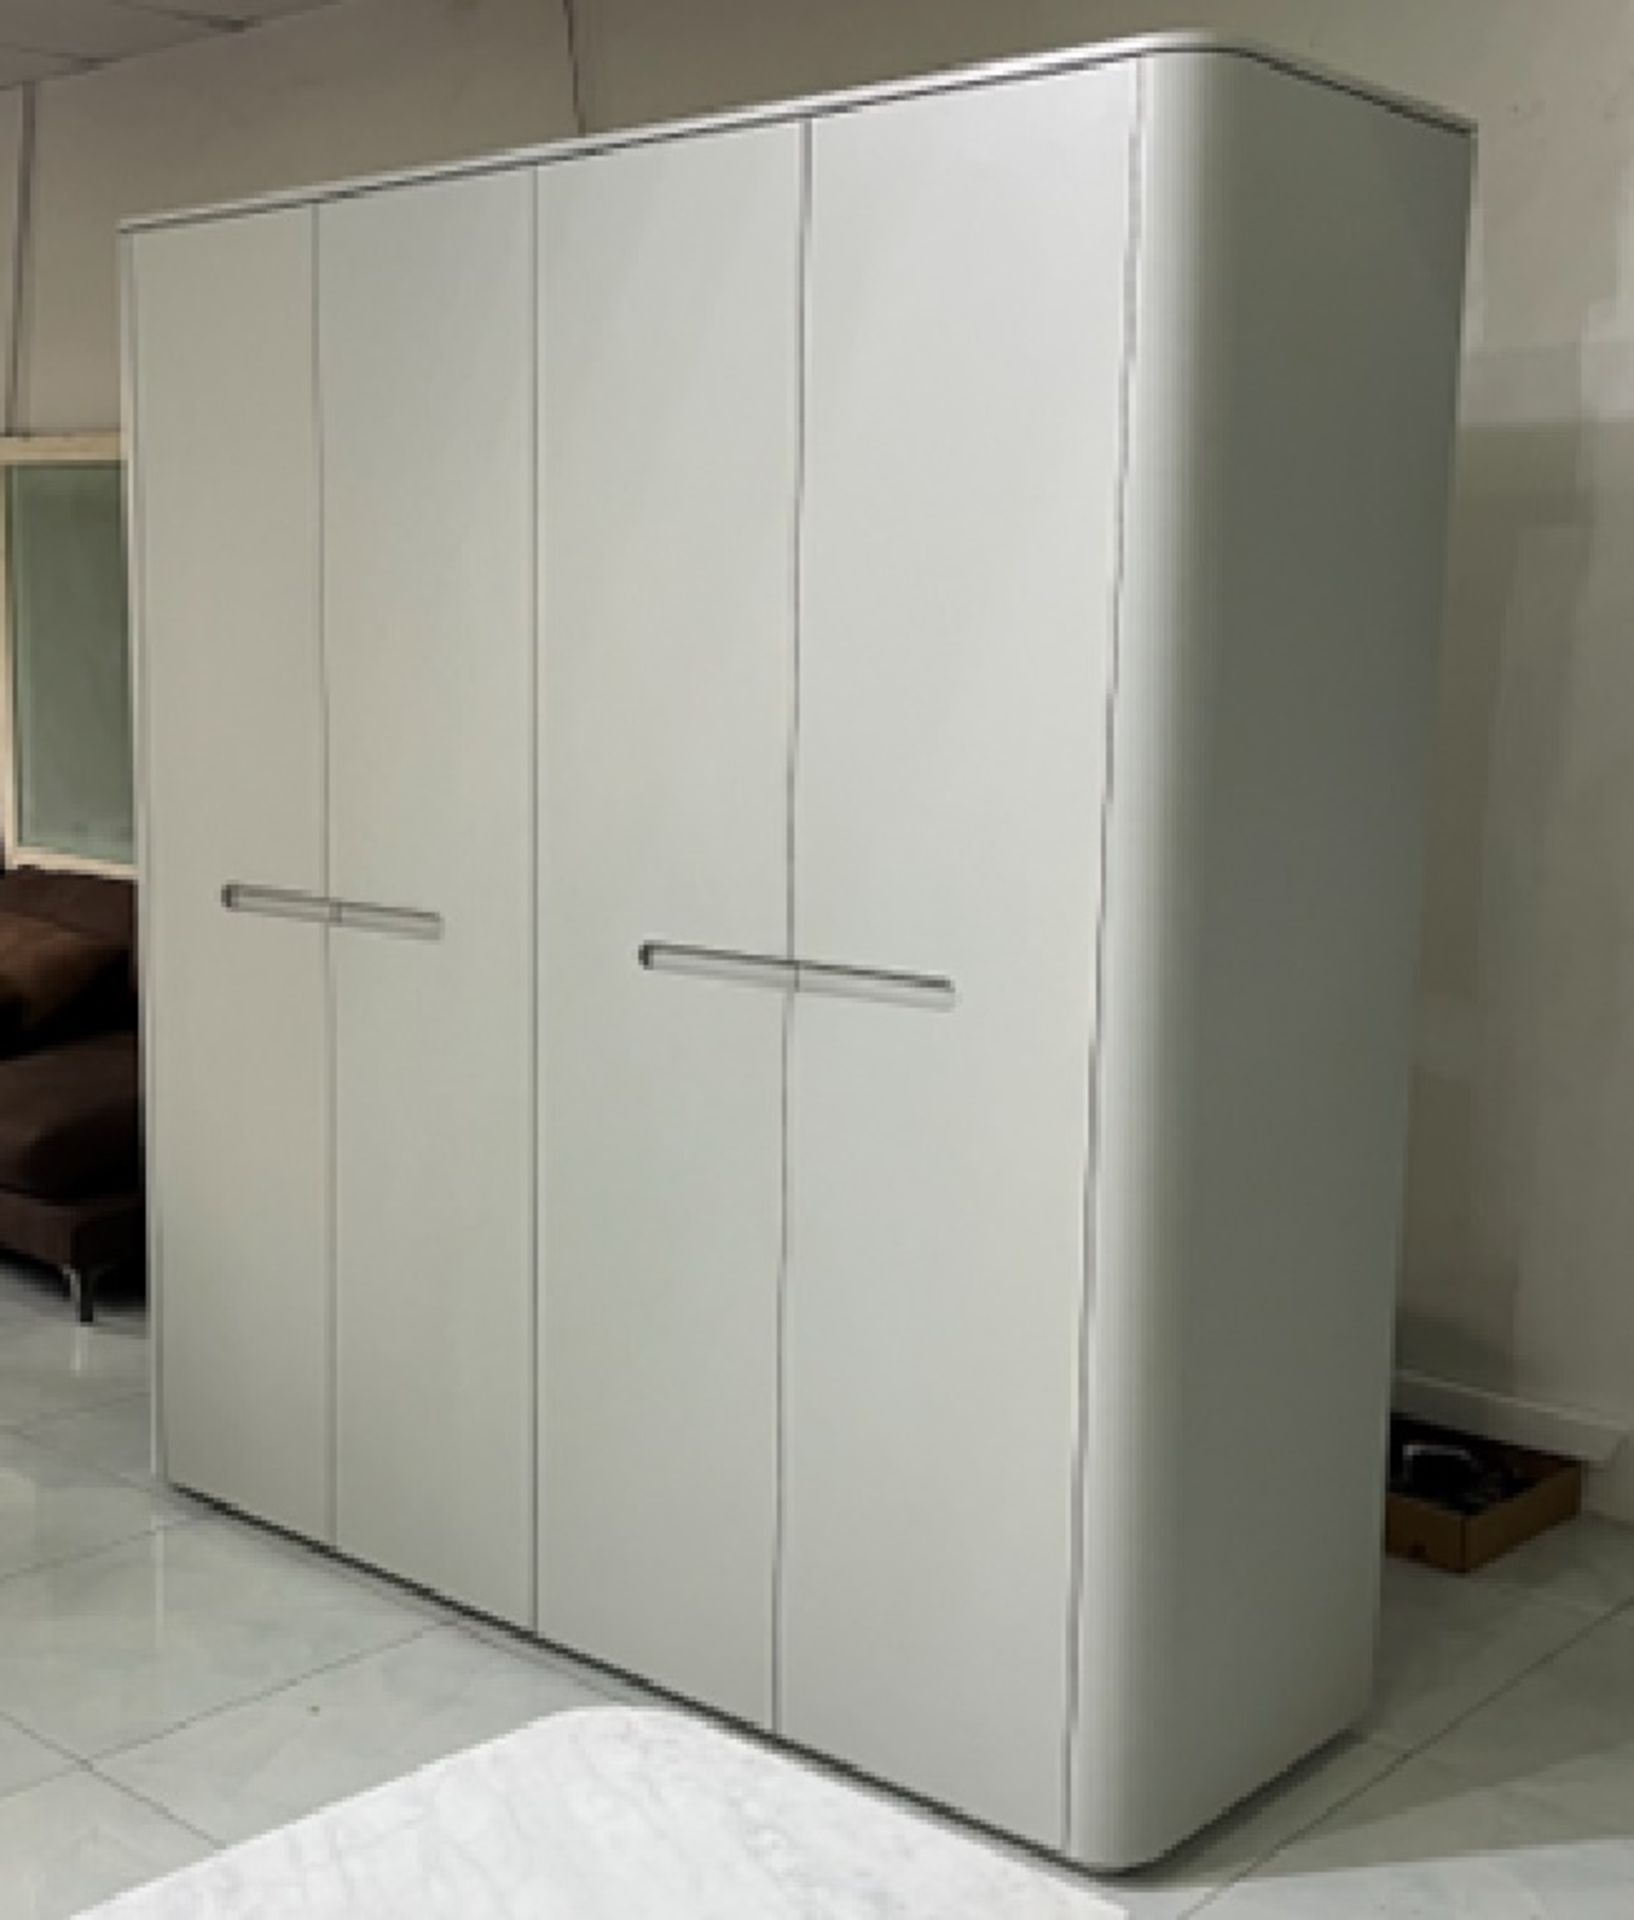 Florence Four Door Wardrobe A stylish grey gloss lacquer finish four door wardrobe with internal - Image 3 of 4